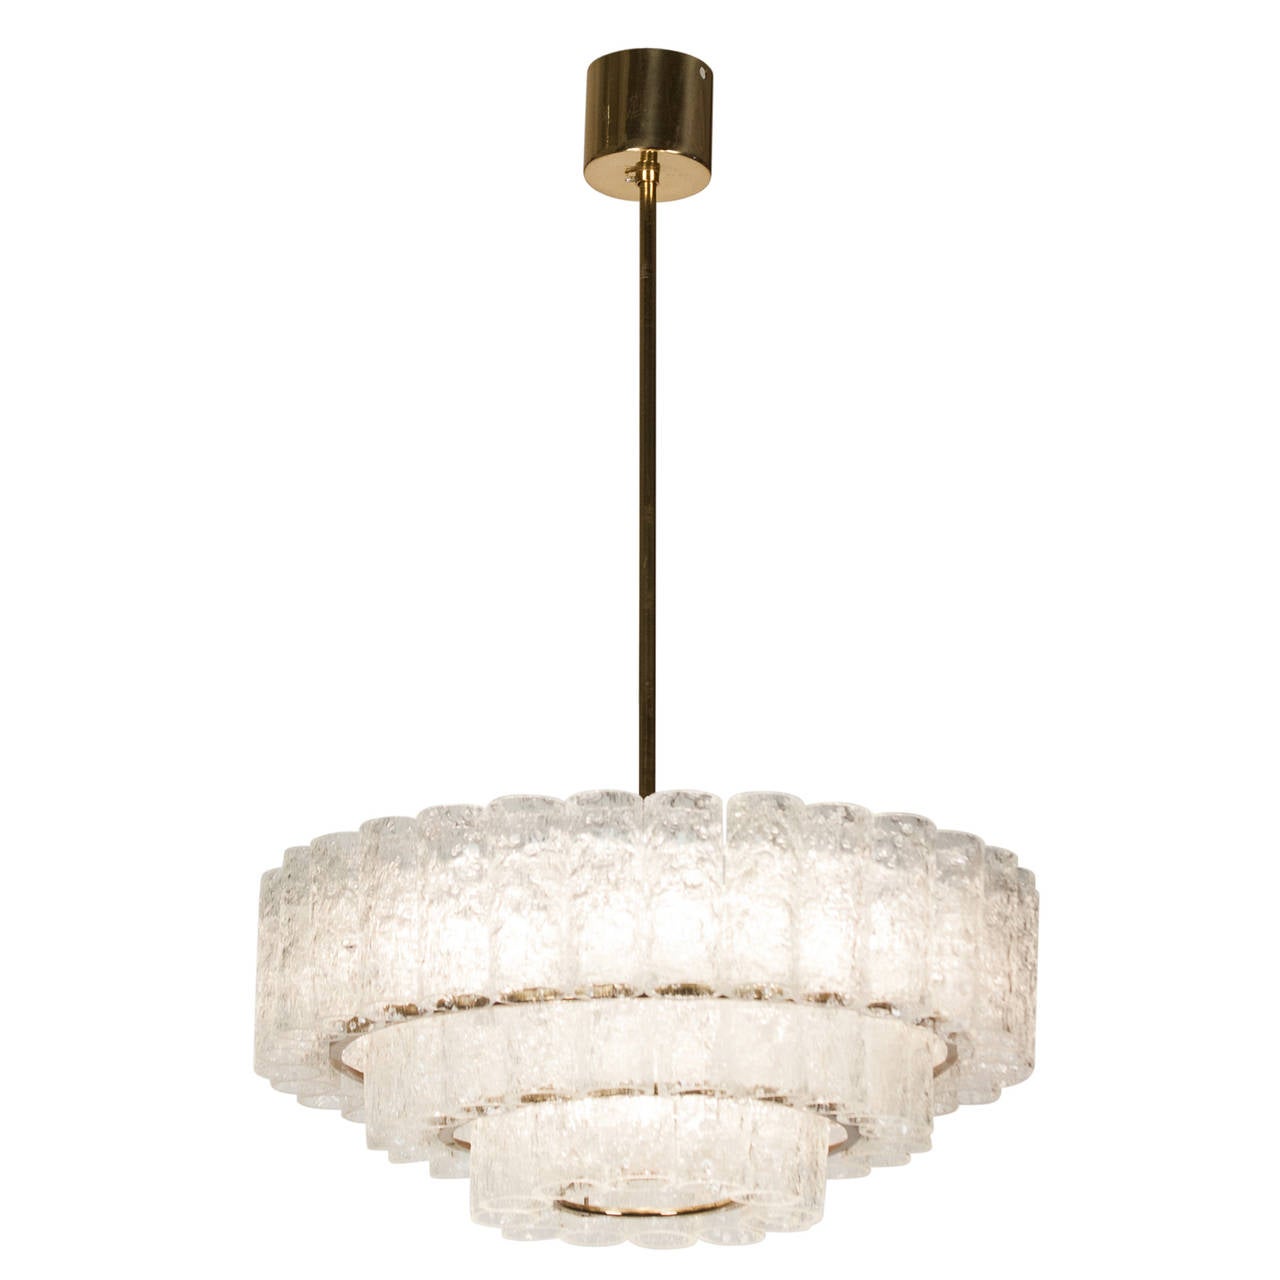 Three-tier textured glass chandelier, three rings of glass cylinders suspended from a brass fixture, by Doria, Germany, 1960s. Overall height 30 in, height of fixture 14 in, diameter 16 in.